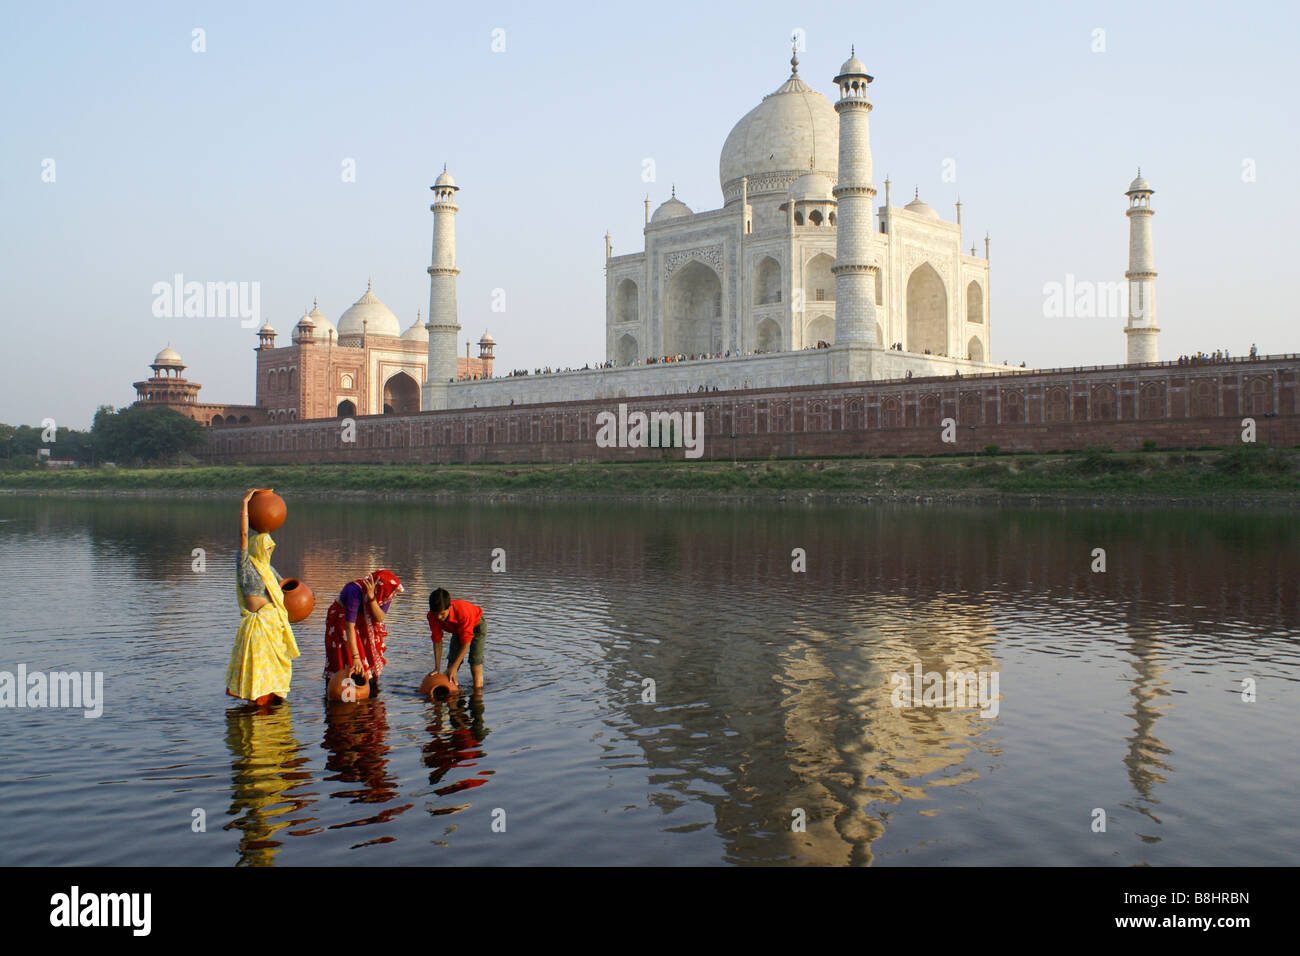 Women and boy getting water from Yamuna River with Taj Mahal in background, Agra, India Stock Photo